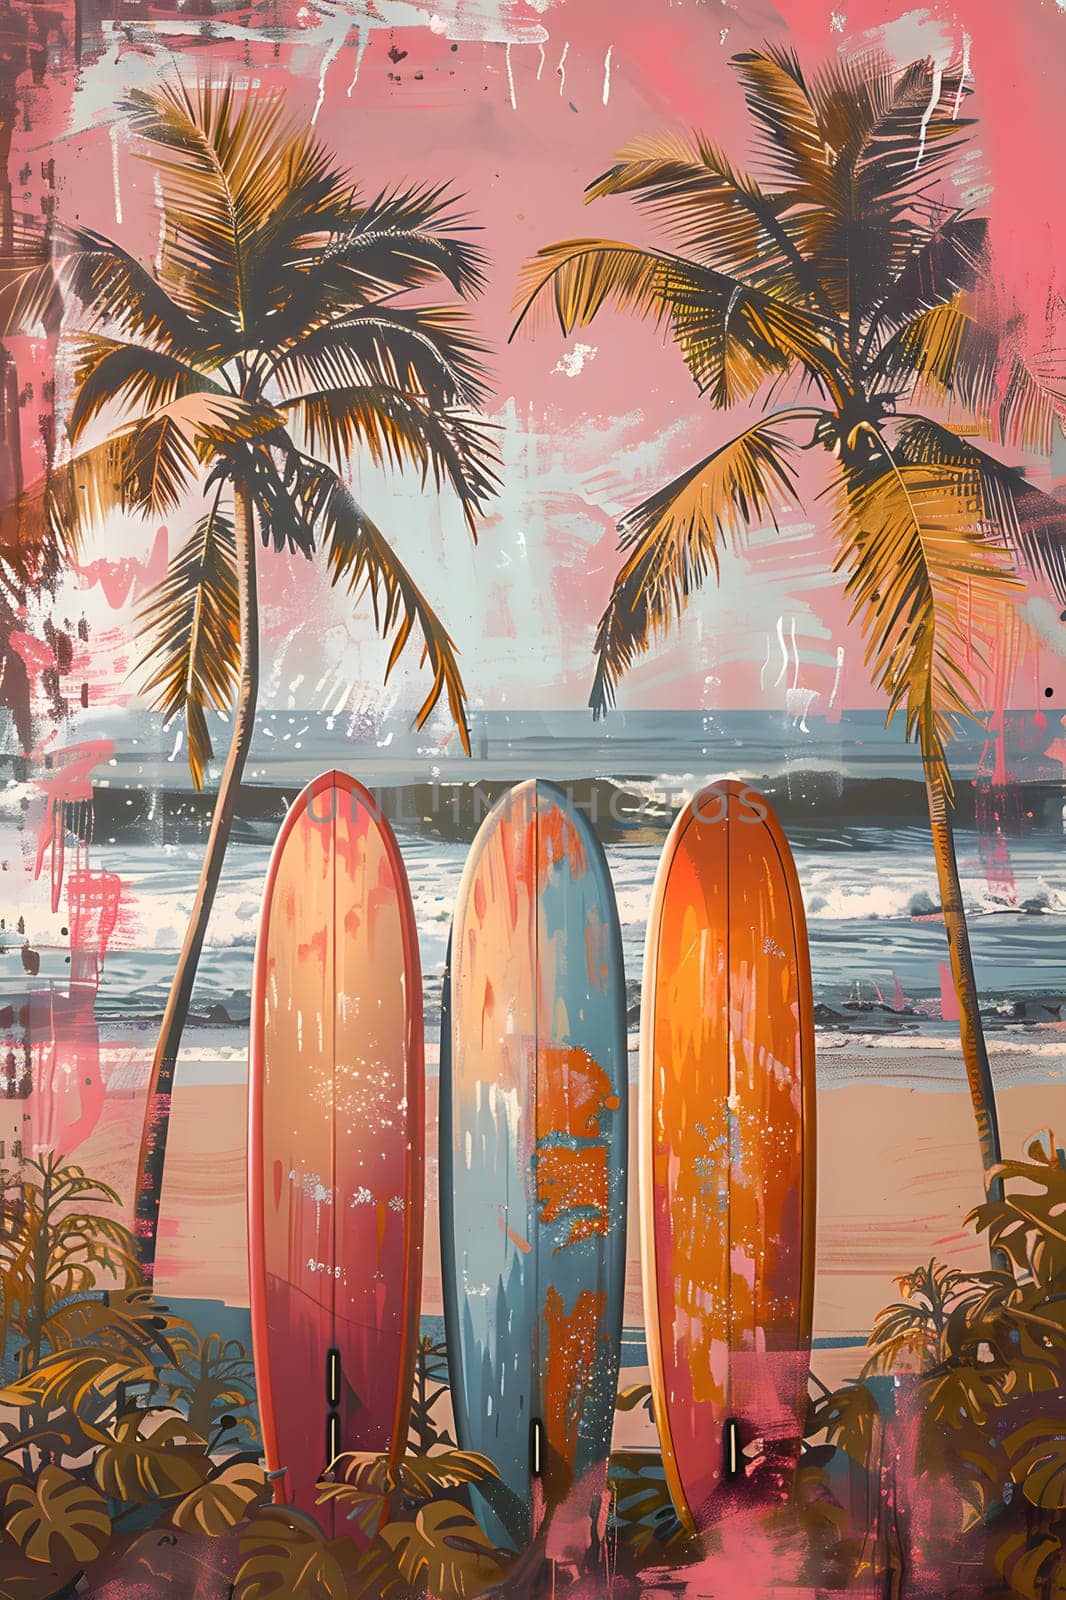 Three surfboards are placed on the sandy beach, framed by lush palm trees against the vibrant sky. The tranquil waters and tropical setting create a picturesque landscape of nature and relaxation